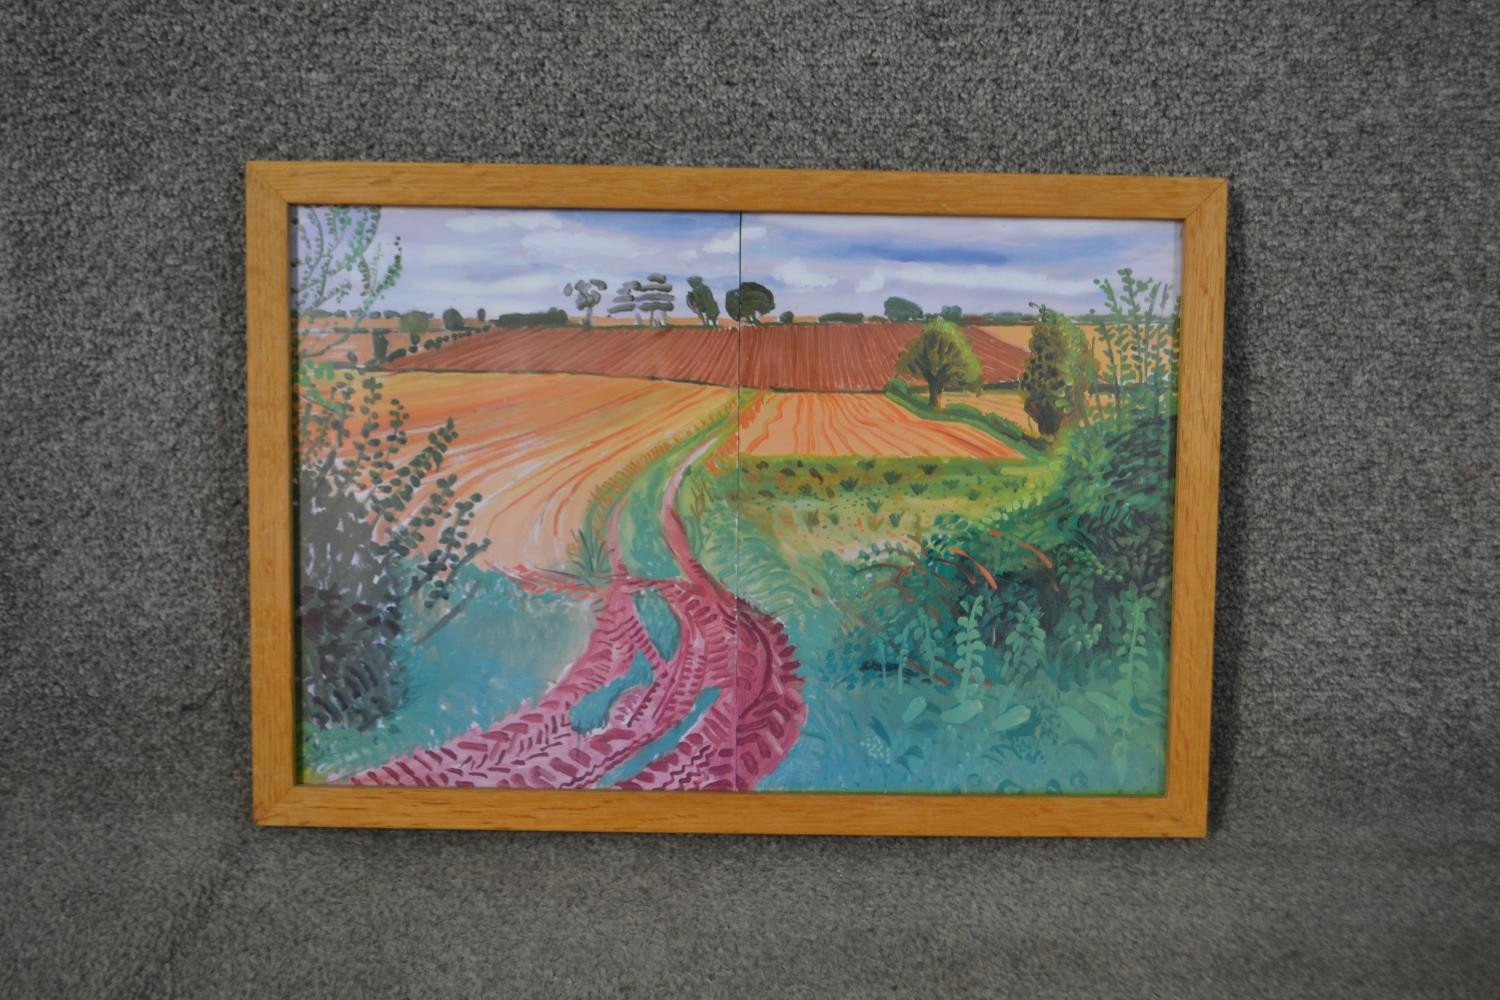 Six framed and glazed limited edition 20th century David Hockney prints of various paintings, - Image 7 of 12